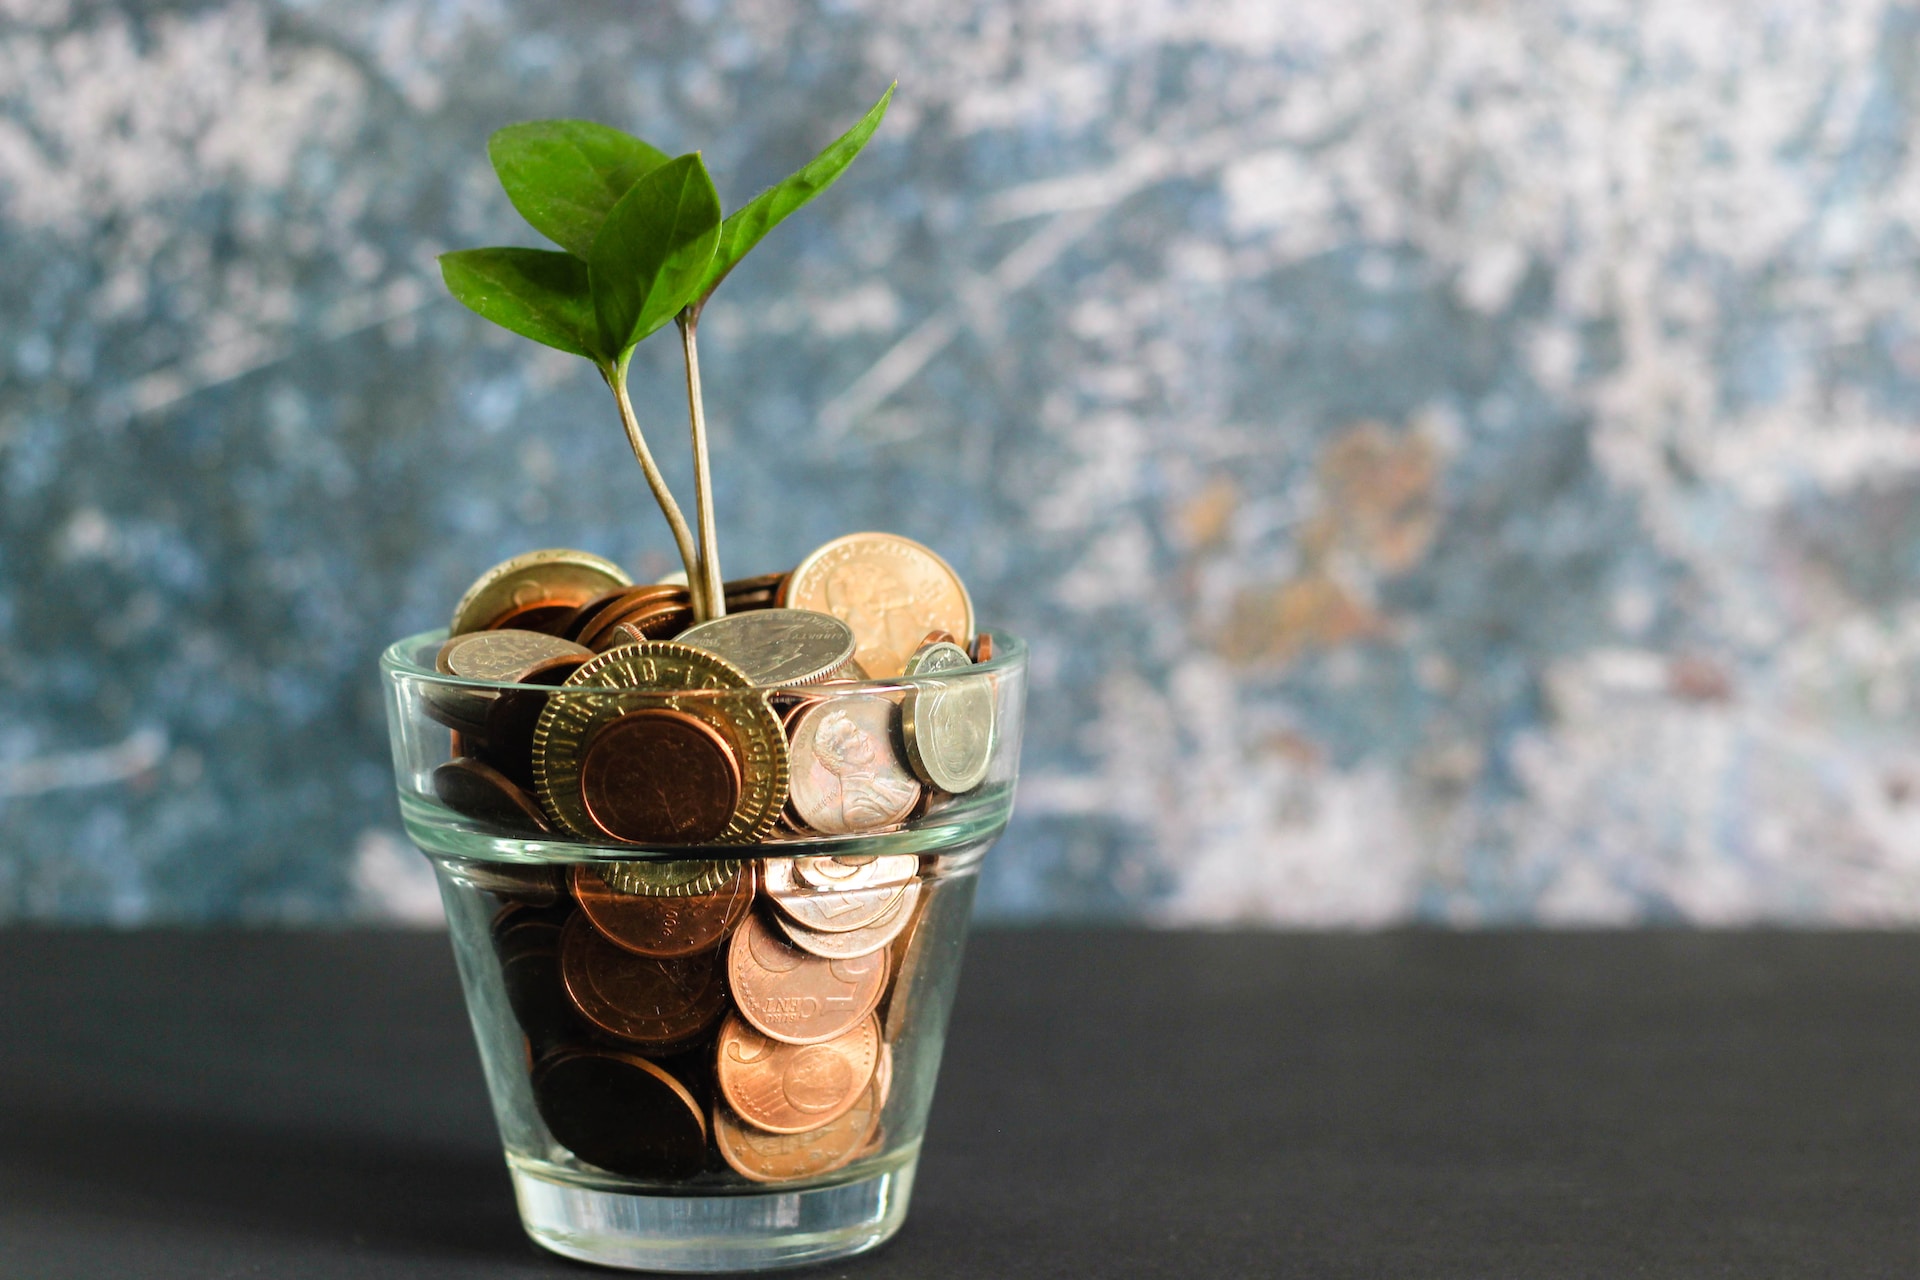 Photo of a small plant, growing out of a glass full of coins.  Photo credit micheile henderson on Unsplash. 